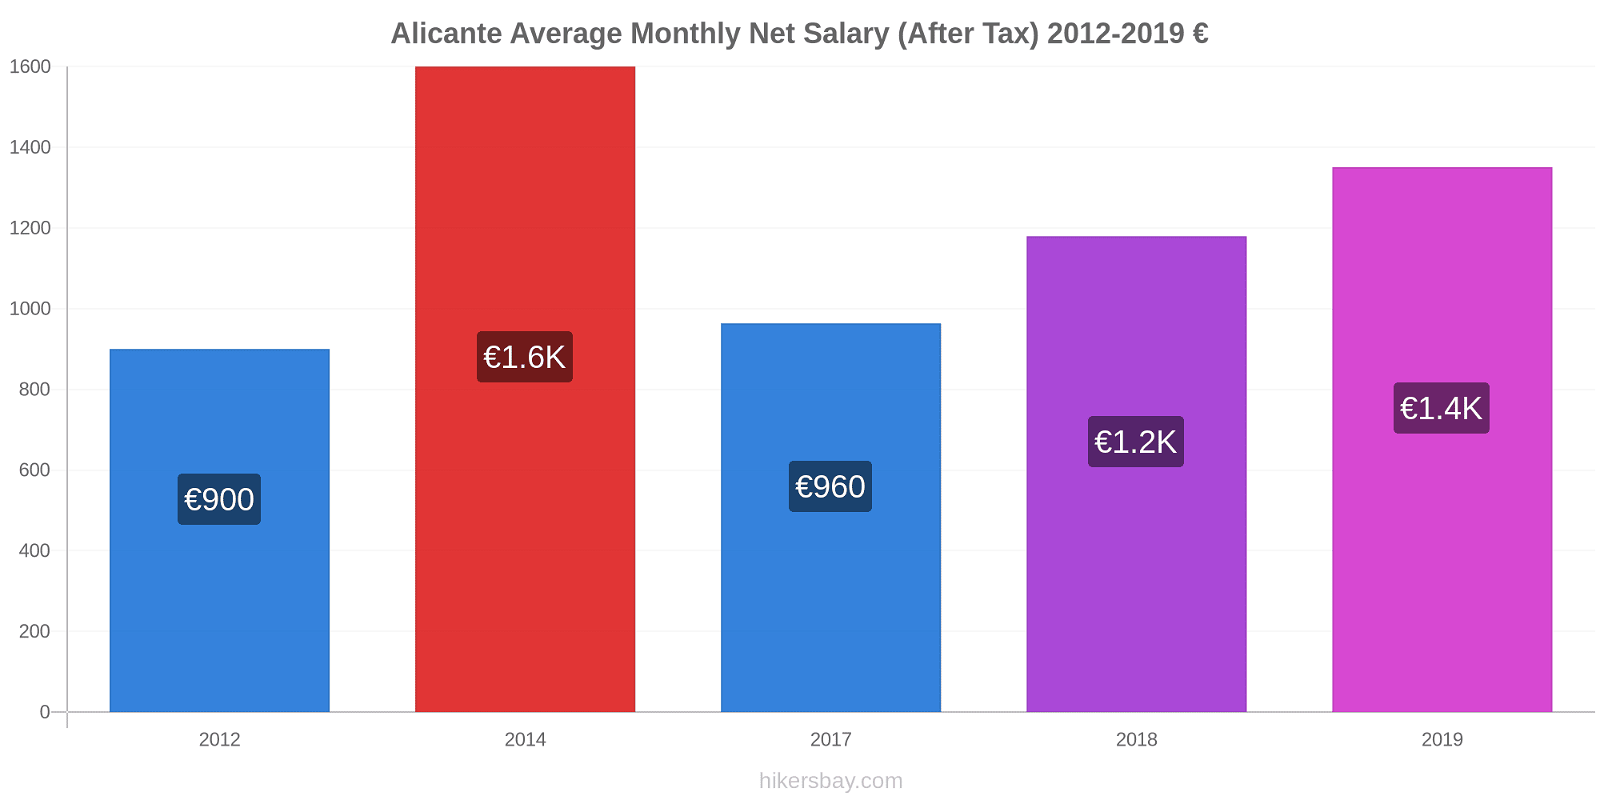 Alicante price changes Average Monthly Net Salary (After Tax) hikersbay.com